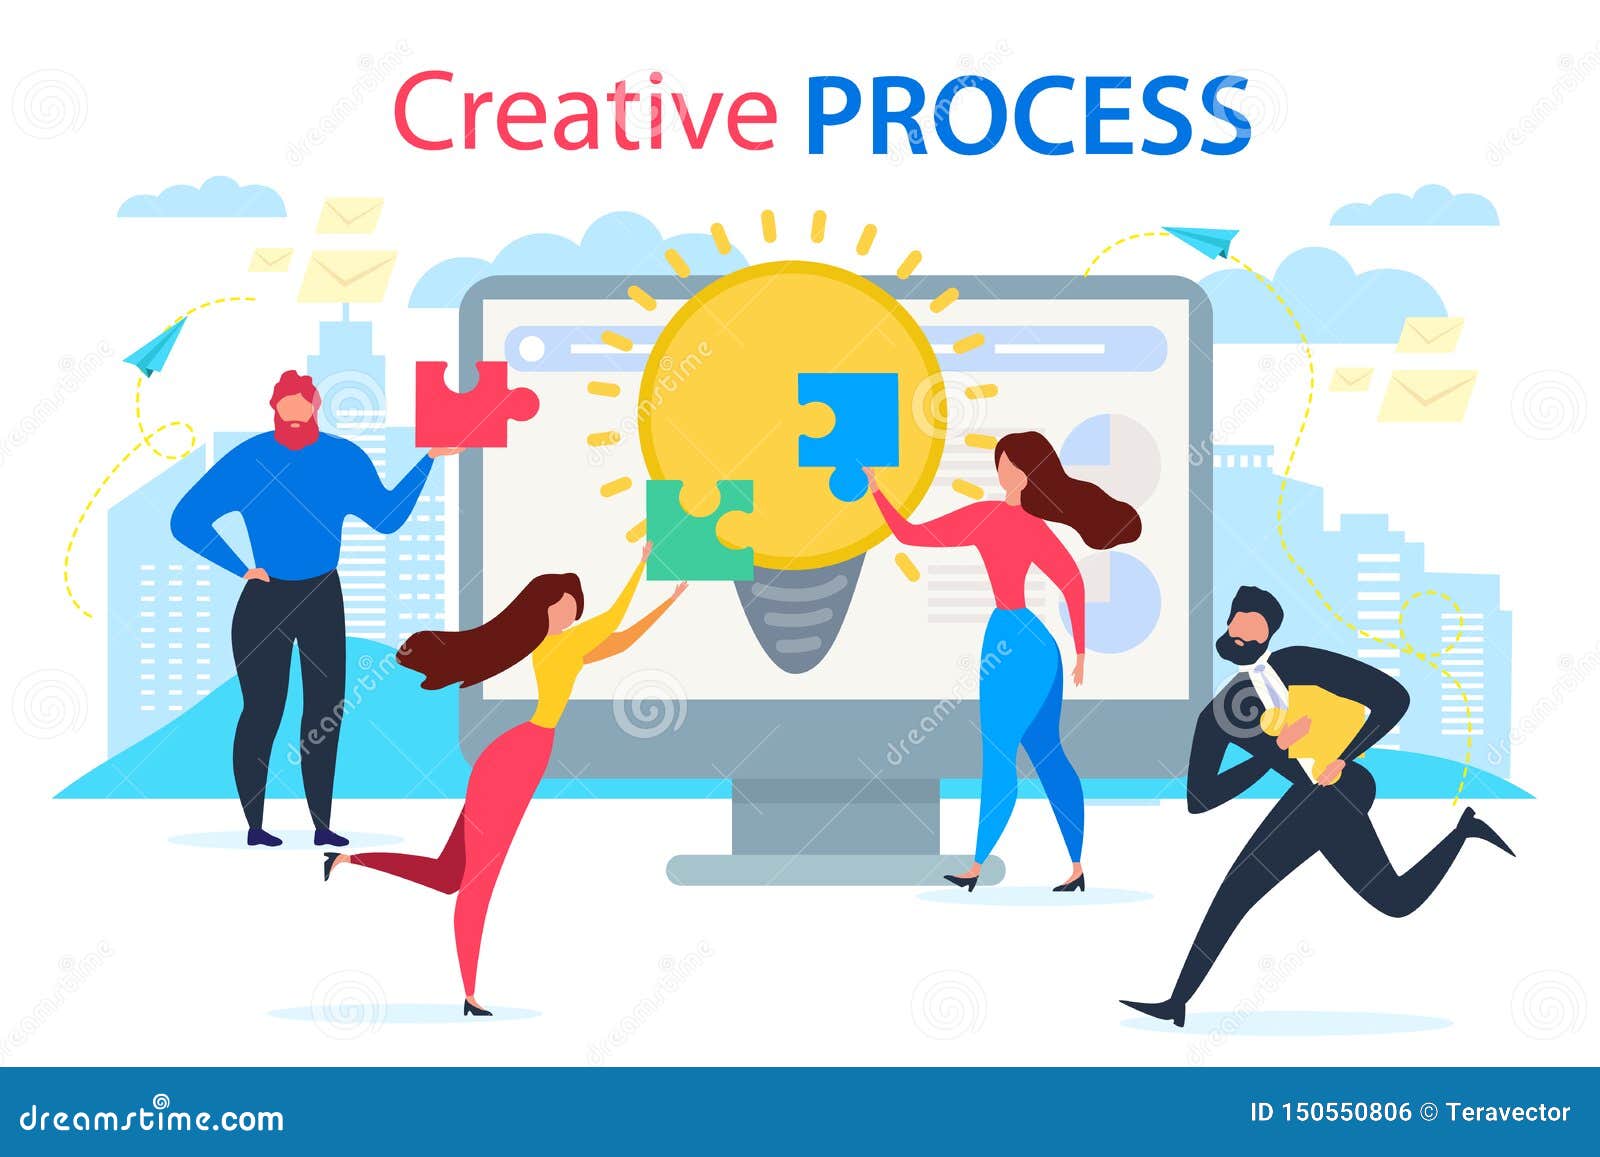 Cartoon People Join Jigsaw Puzzle Creative Process Stock Vector -  Illustration of character, connection: 150550806